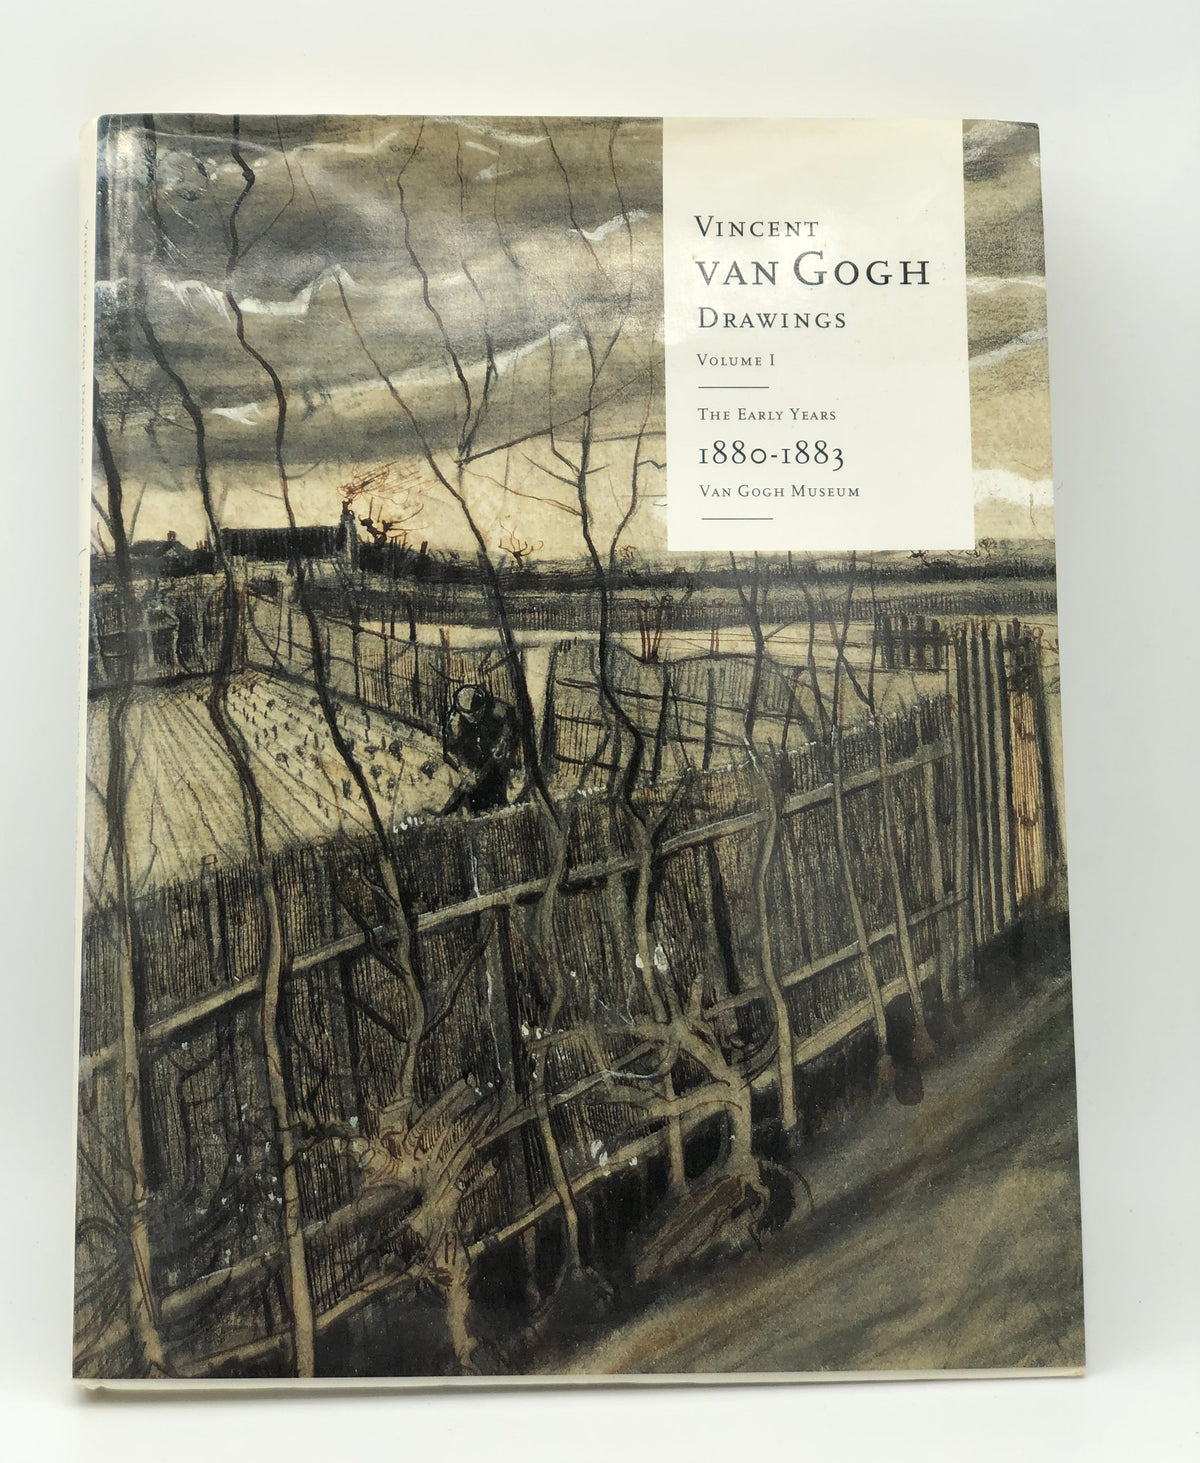 Vincent van Gogh Drawings: The Early Years, 1880-1883 Volume I